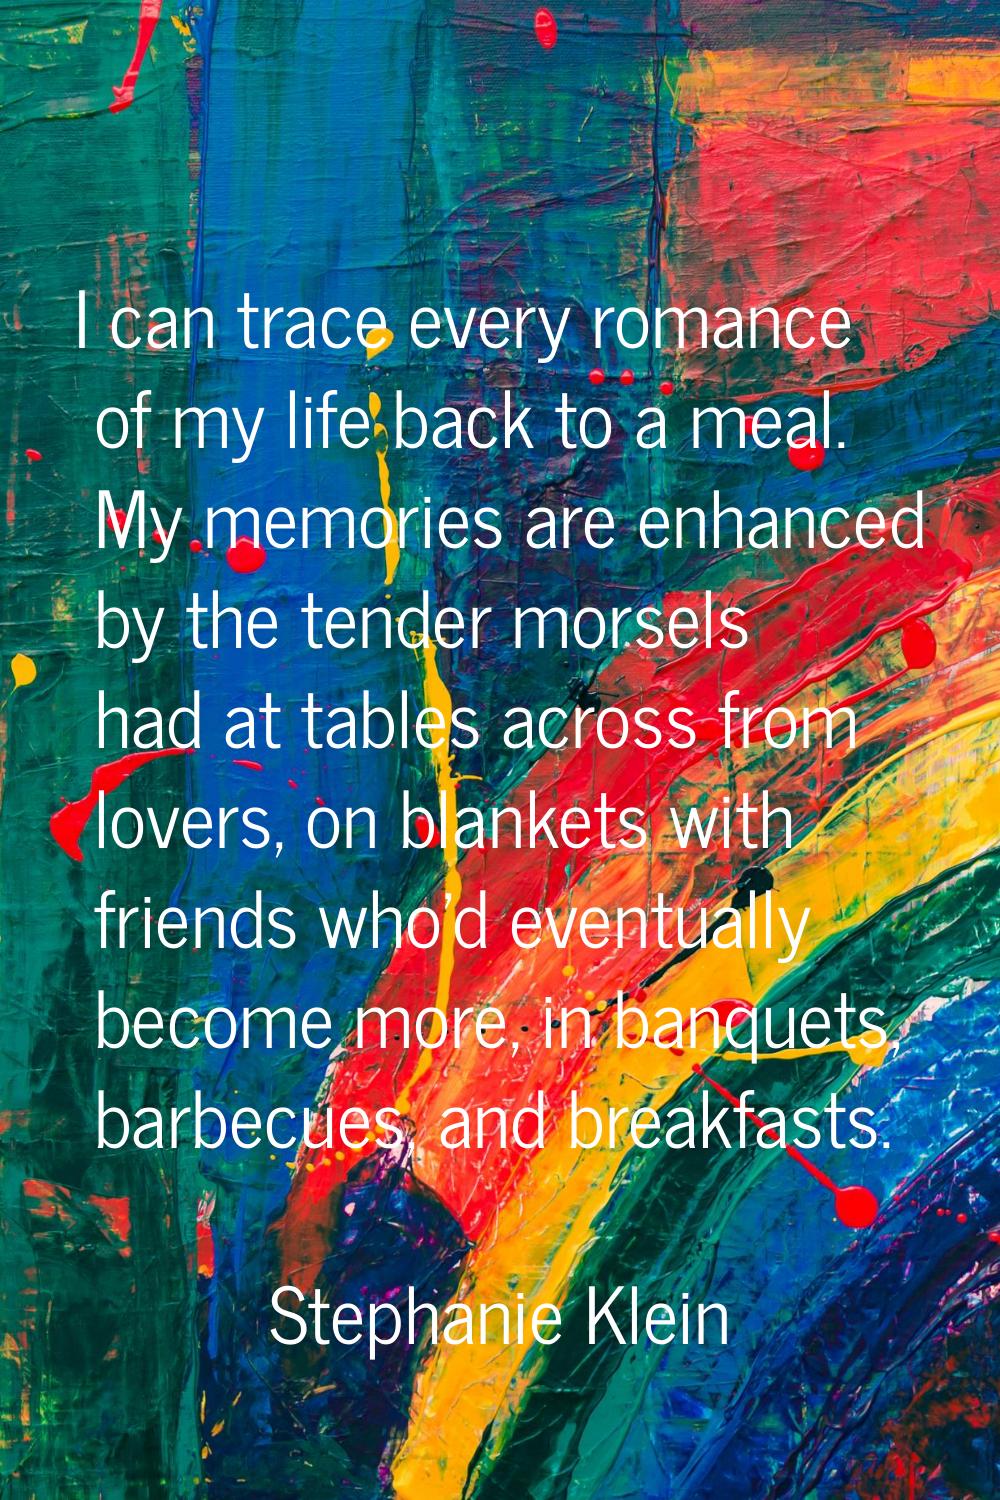 I can trace every romance of my life back to a meal. My memories are enhanced by the tender morsels